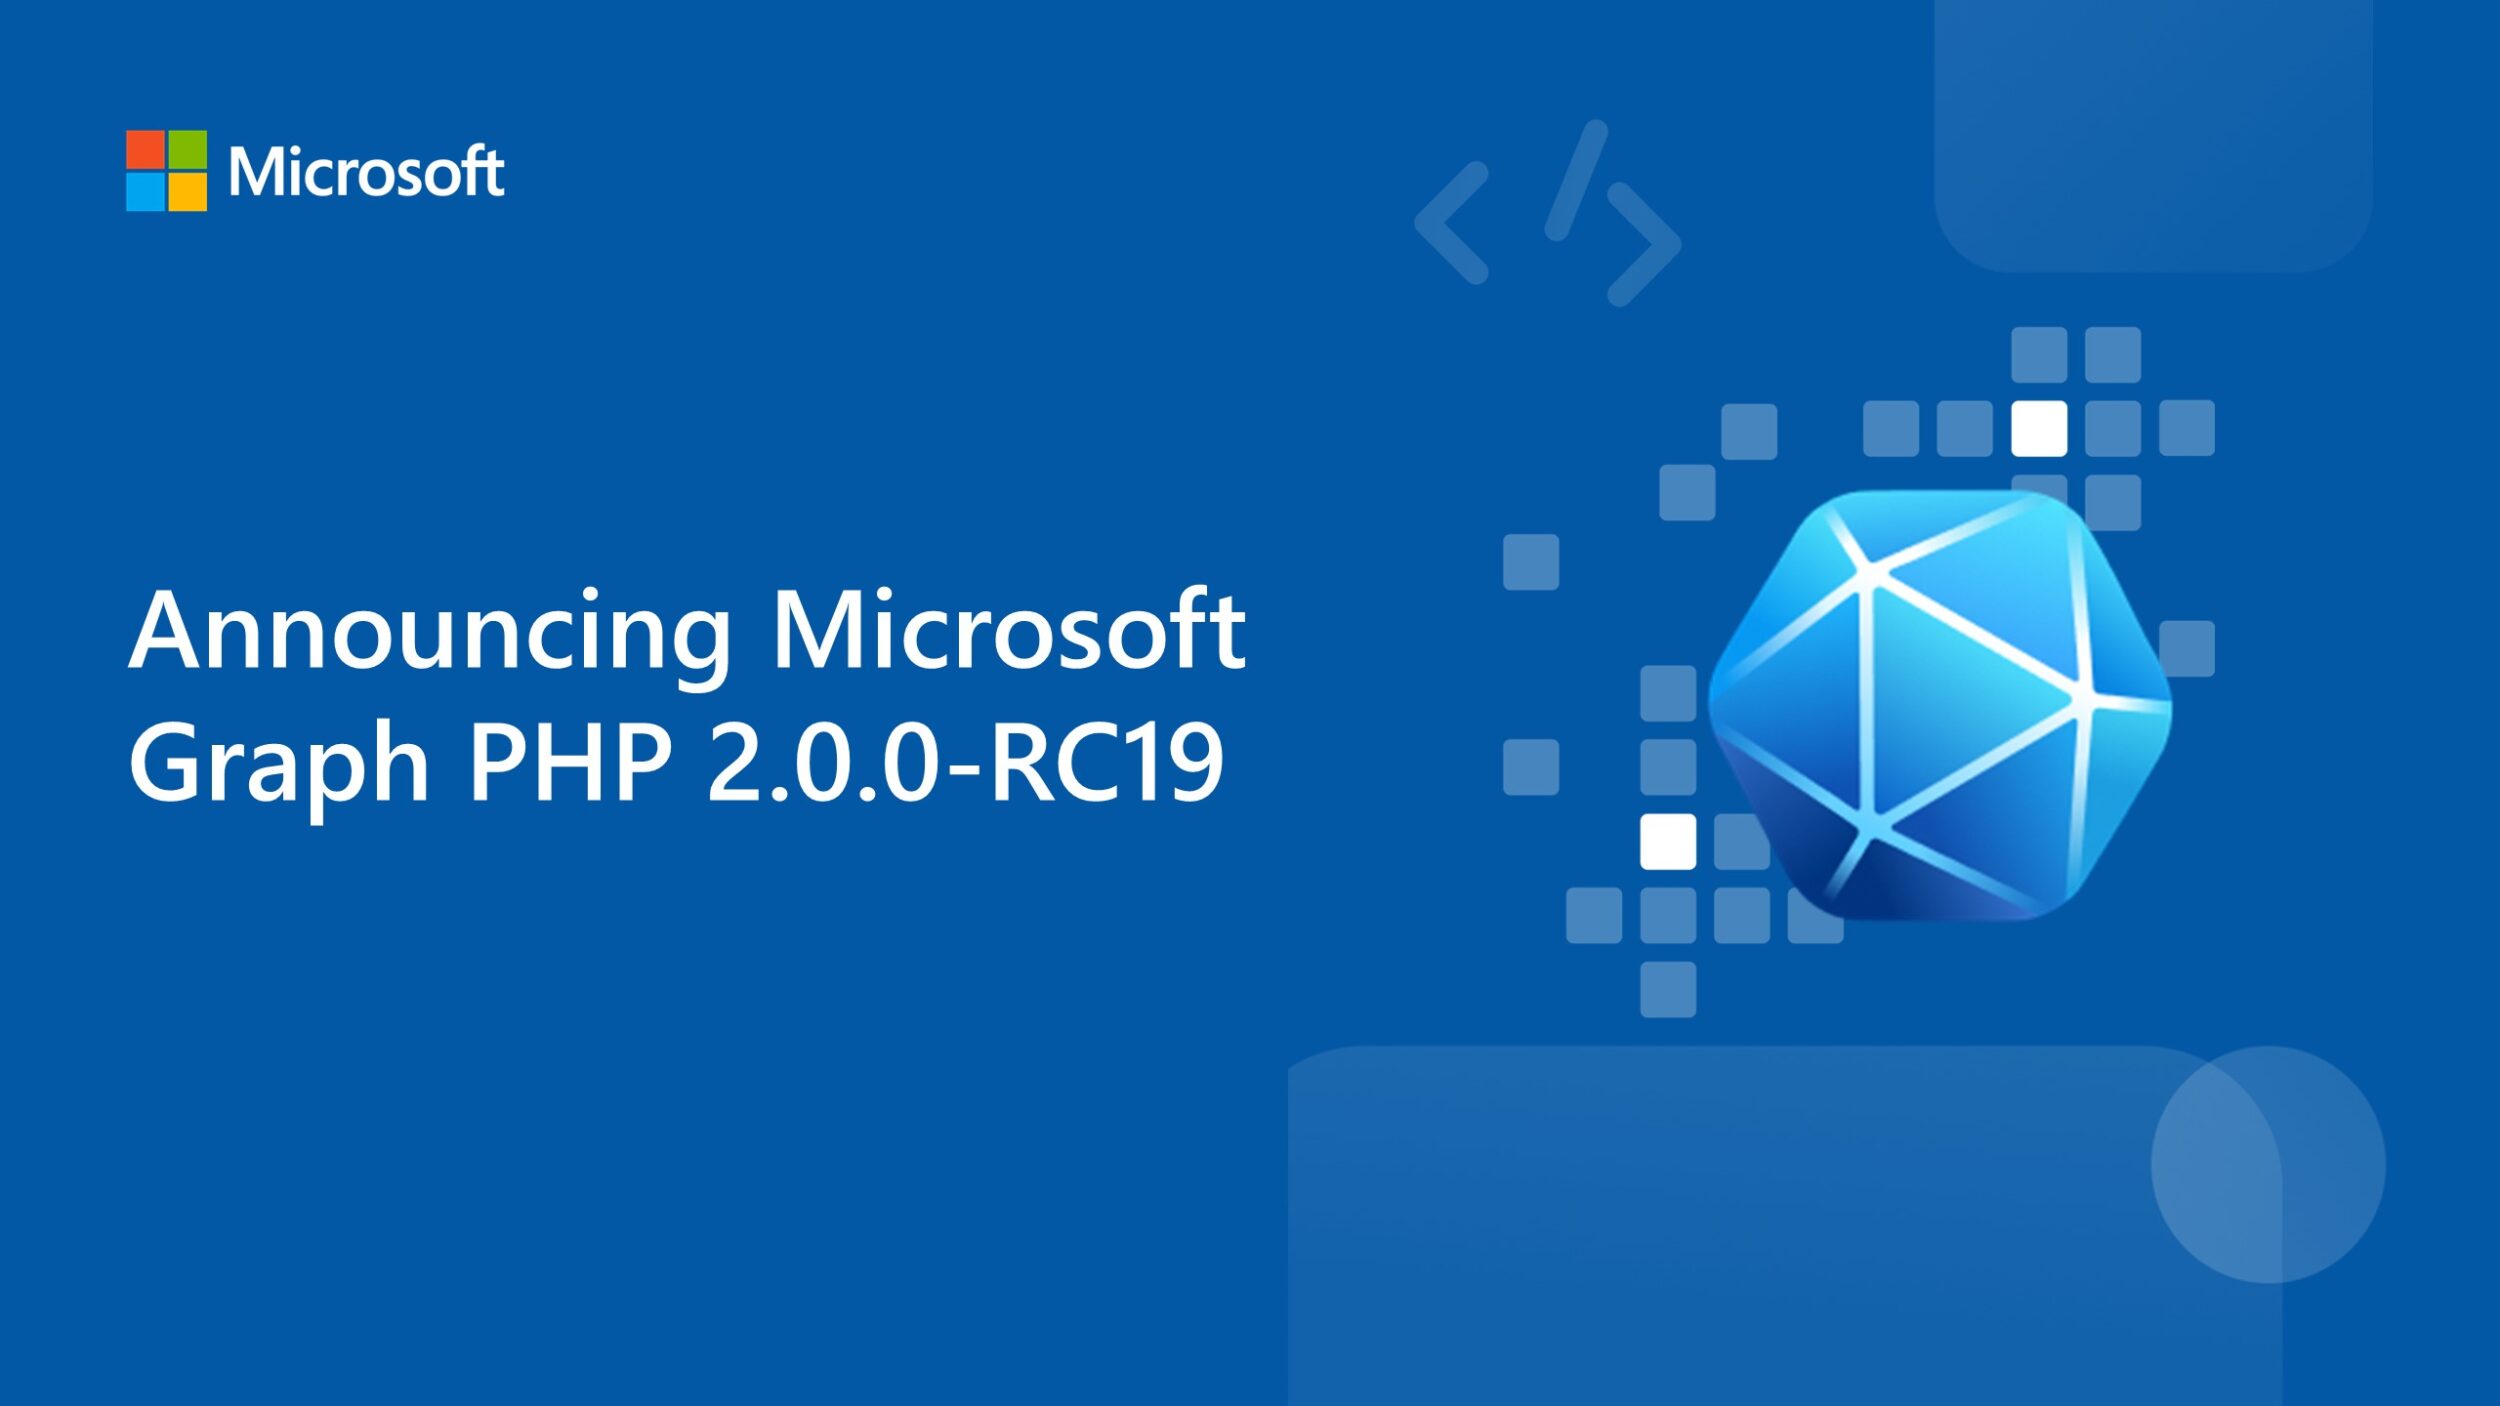 Announcing Microsoft Graph PHP 2.0.0-RC19